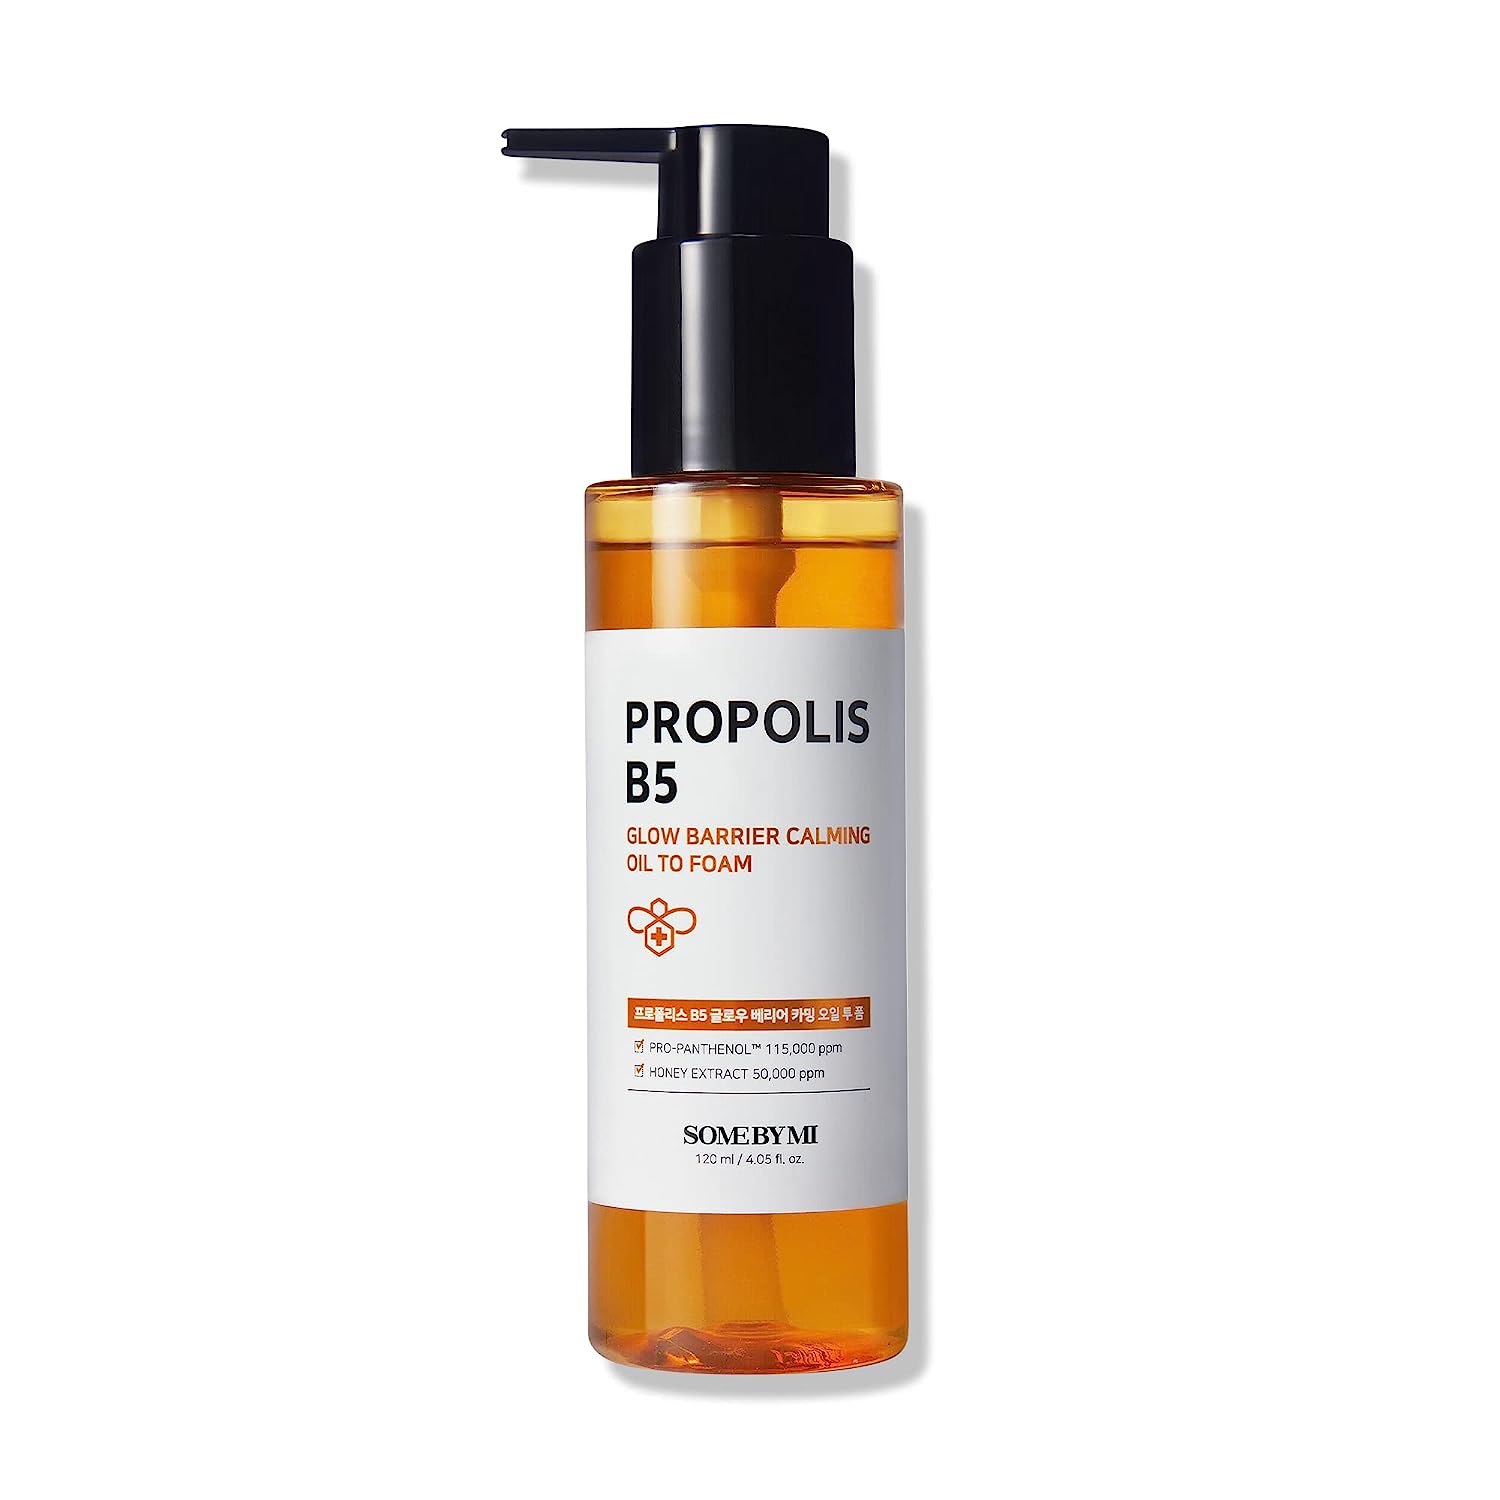 Propolis B5 Glow Barrier Calming Oil to Foam is an ideal 2 in 1 product for double cleansing.